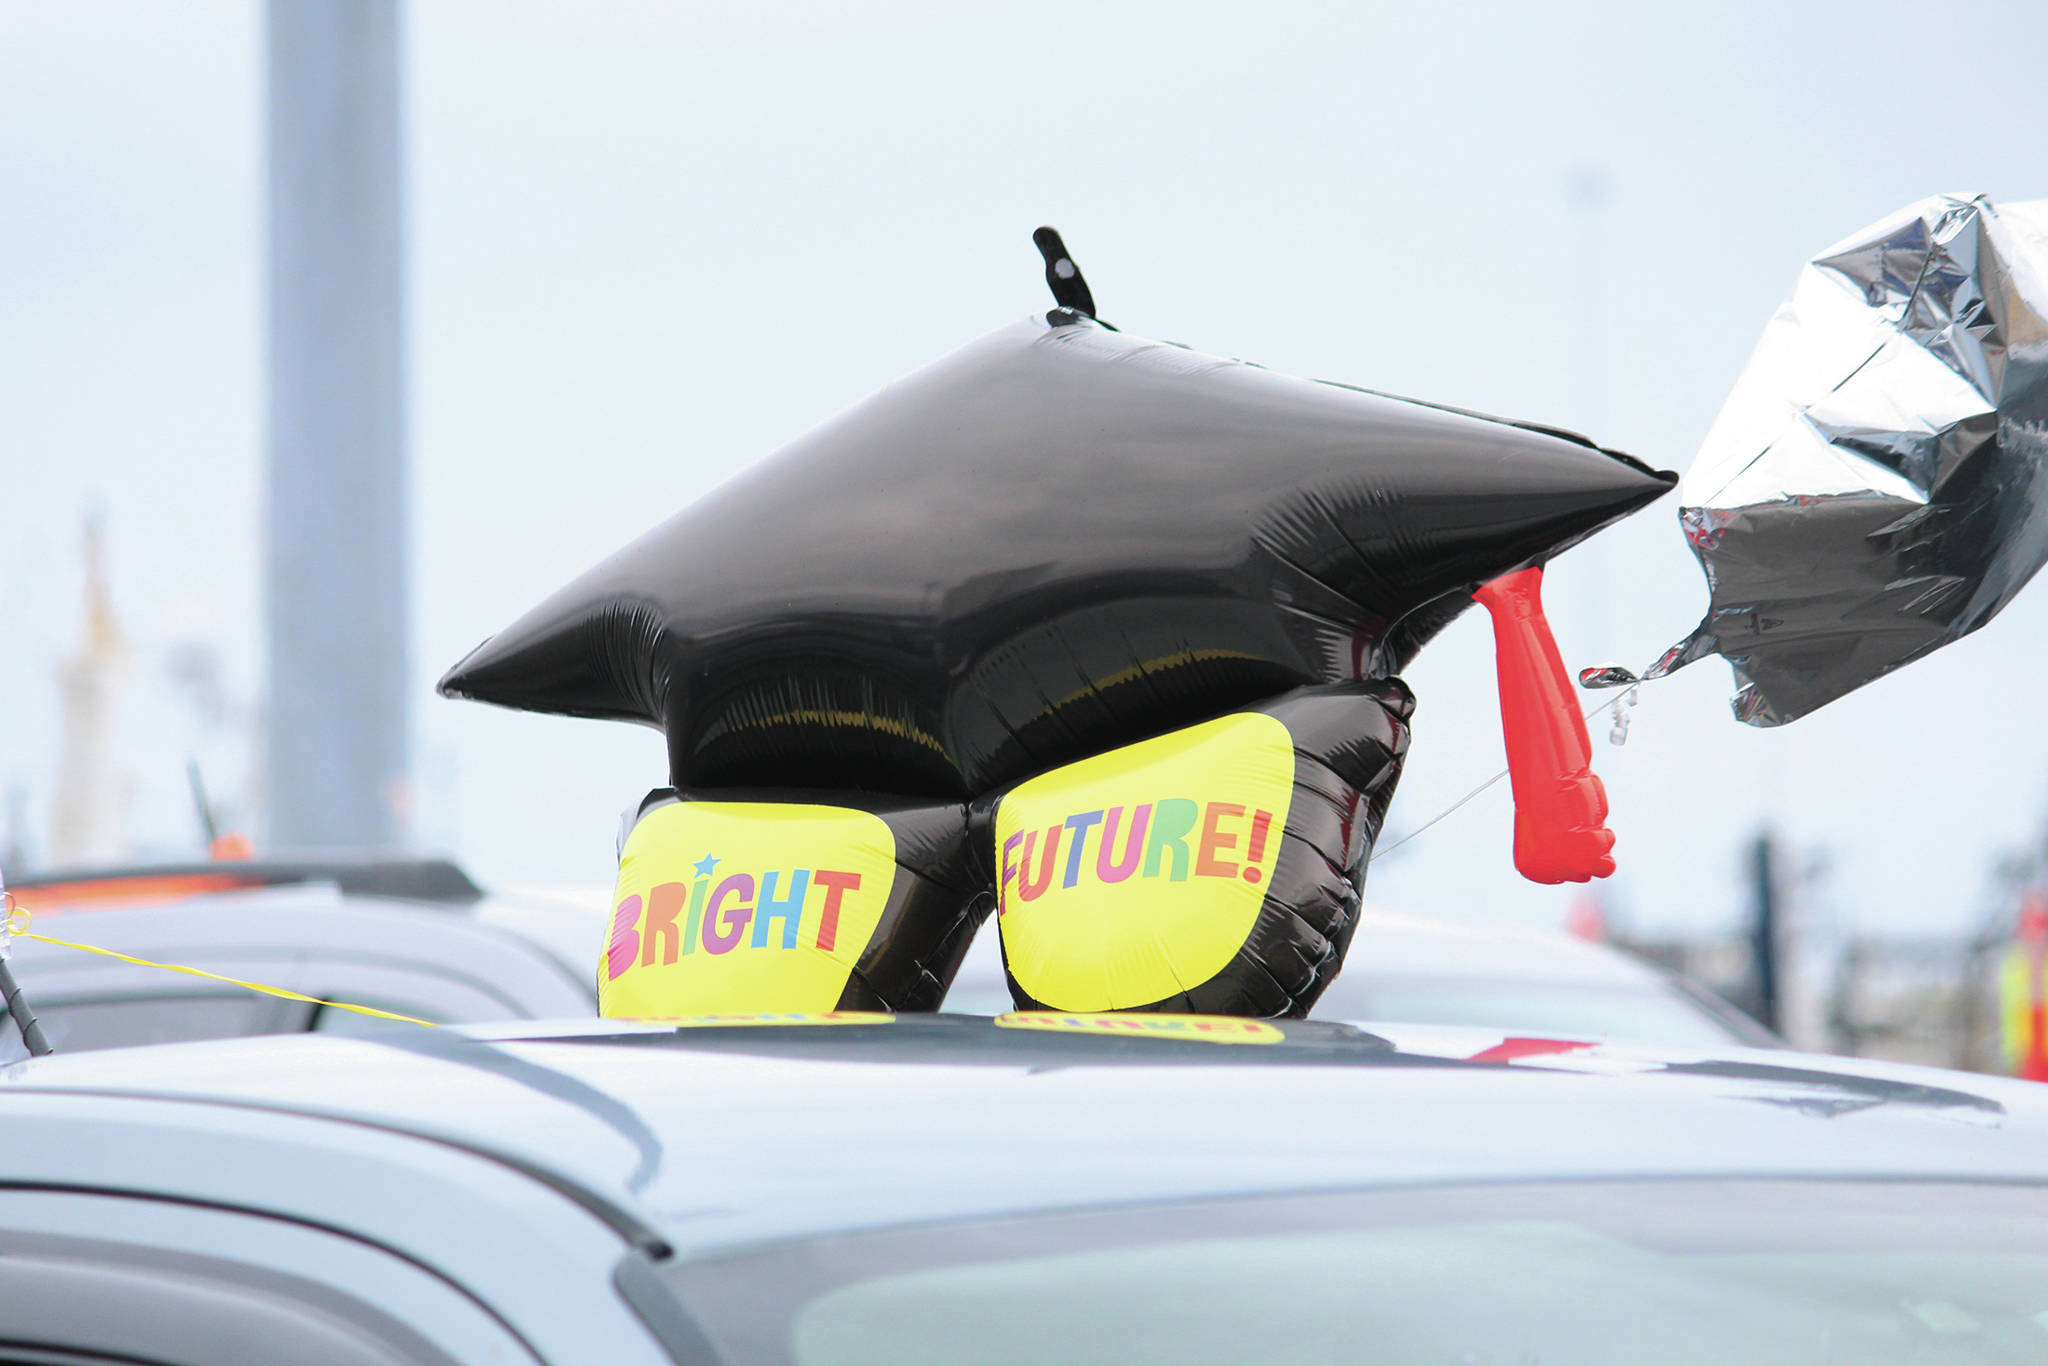 A graduation balloon sits atop a vehicle during an alternative graduation ceremony for Homer Flex School on Monday, May 18, 2020 at the Homer Harbor in Homer, Alaska. (Photo by Megan Pacer/Homer News)